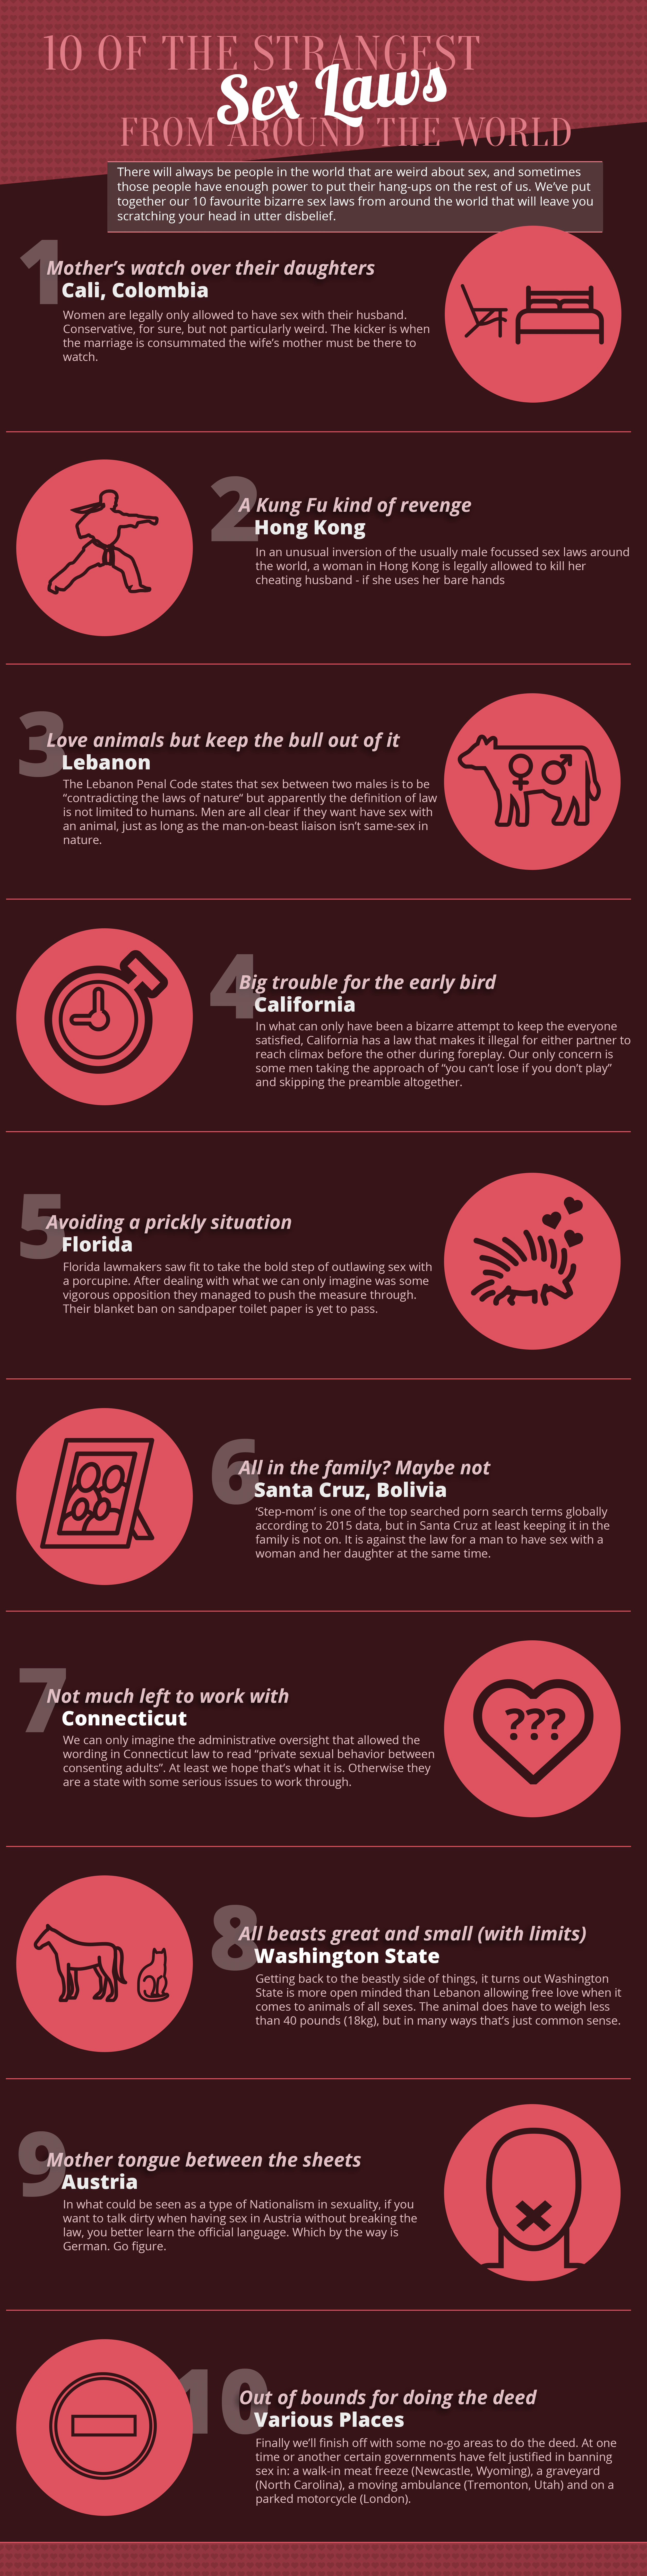 10 Bizarre Sex Laws From Around The World In One Infographic